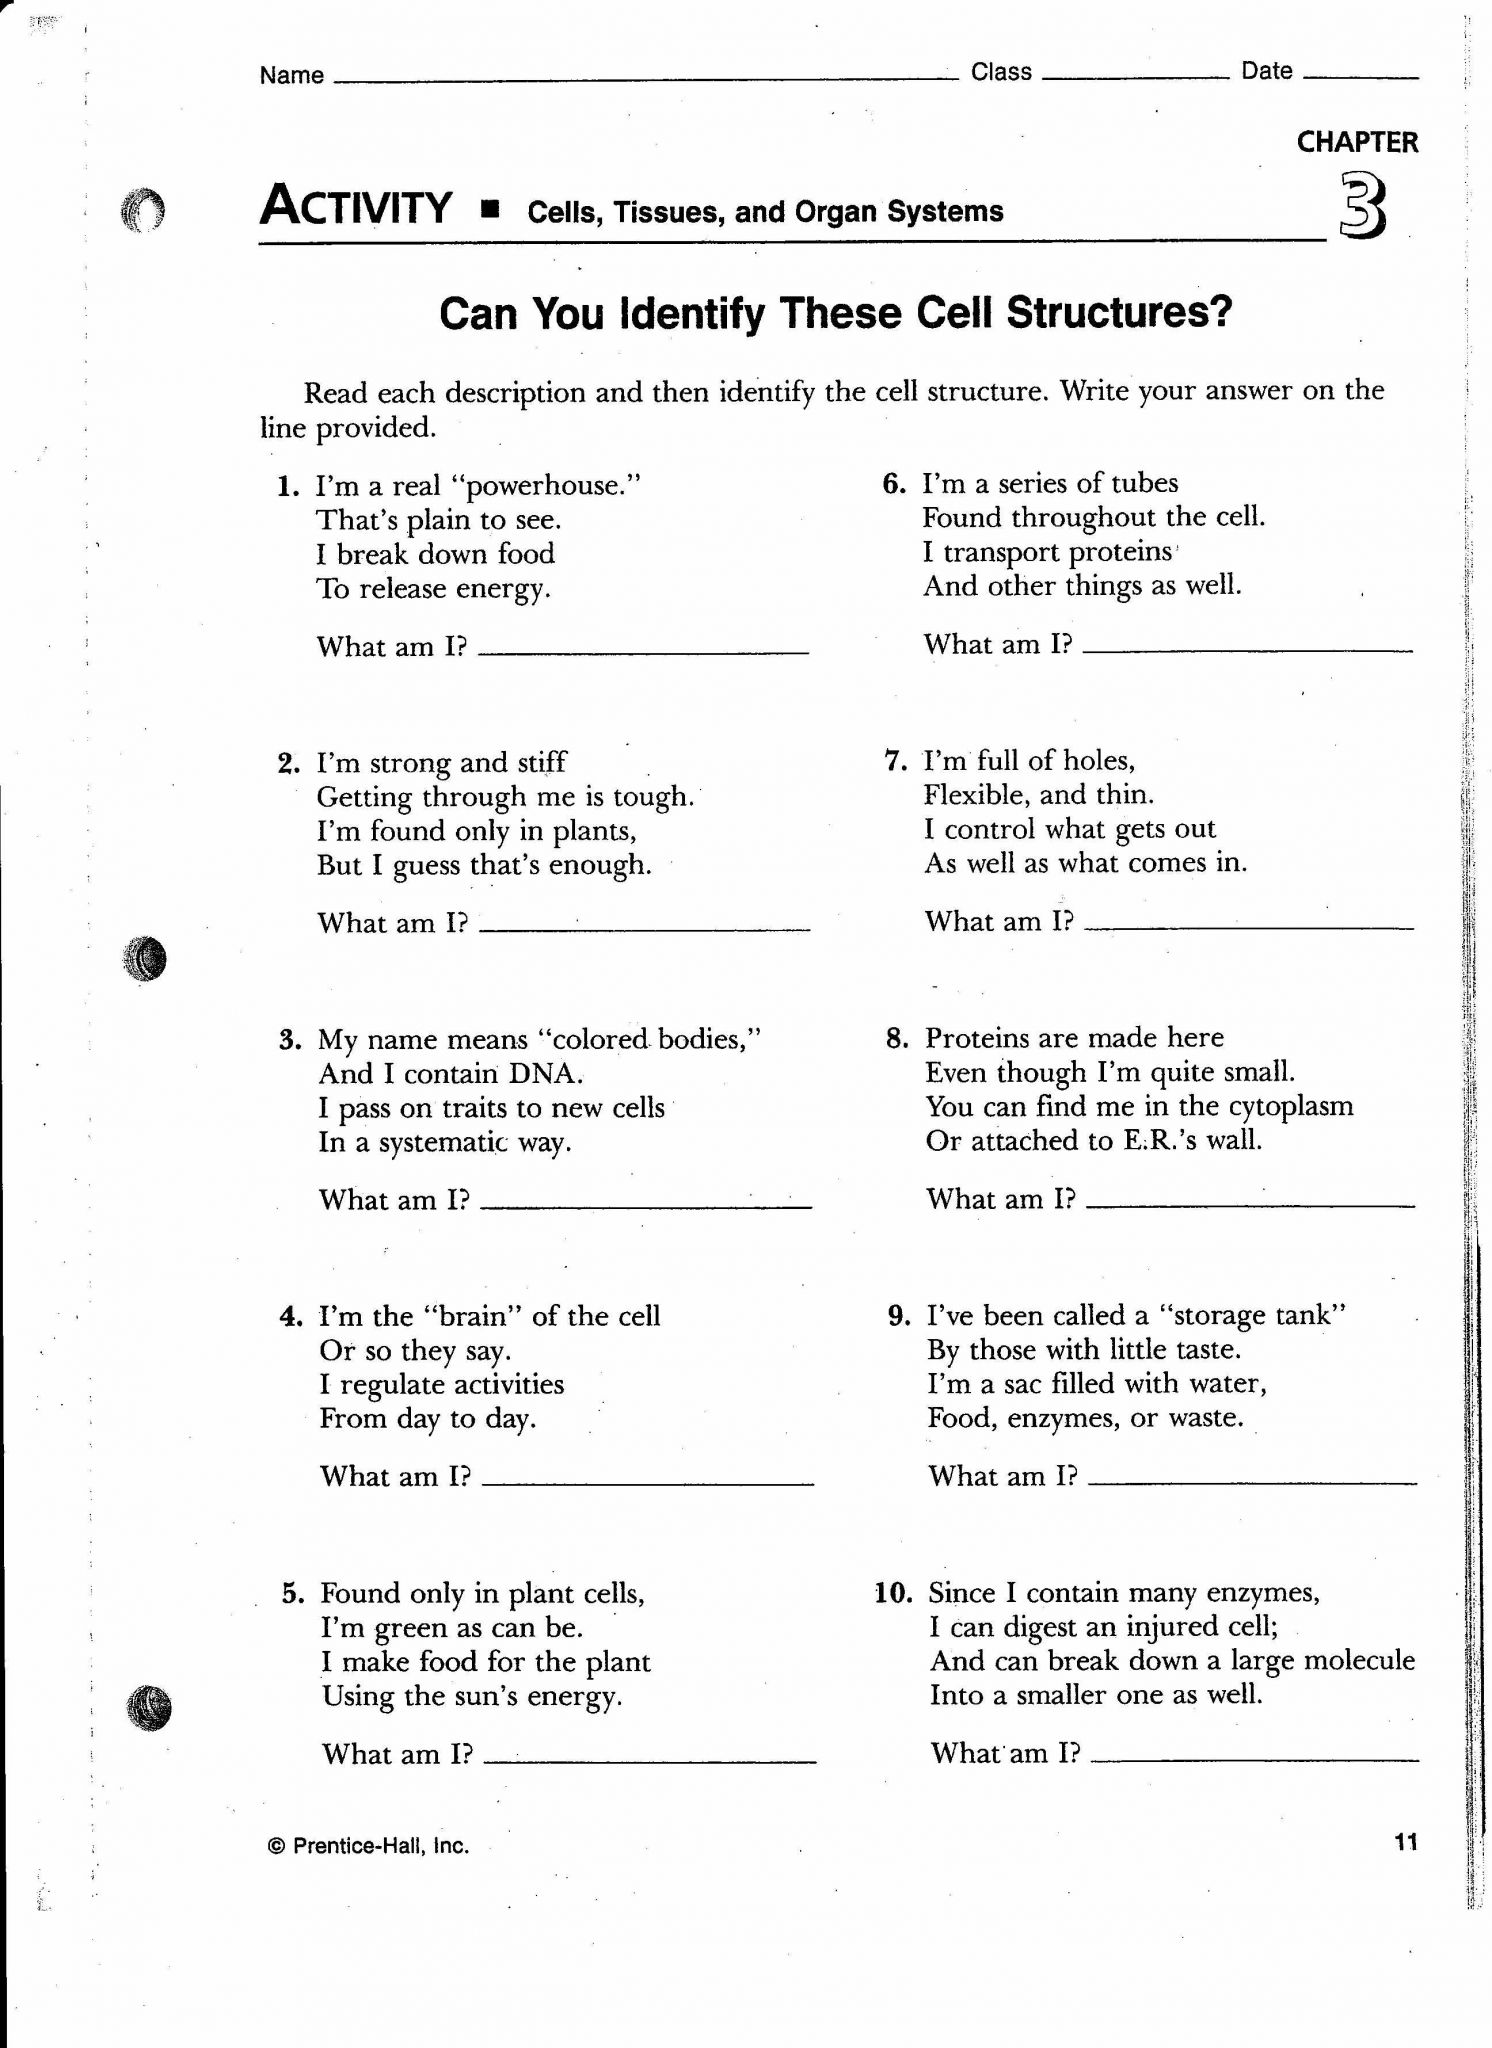 Looking Inside Cells Worksheet Answers or Cell Transport Review Worksheet 502 Best Cells Cells Cells